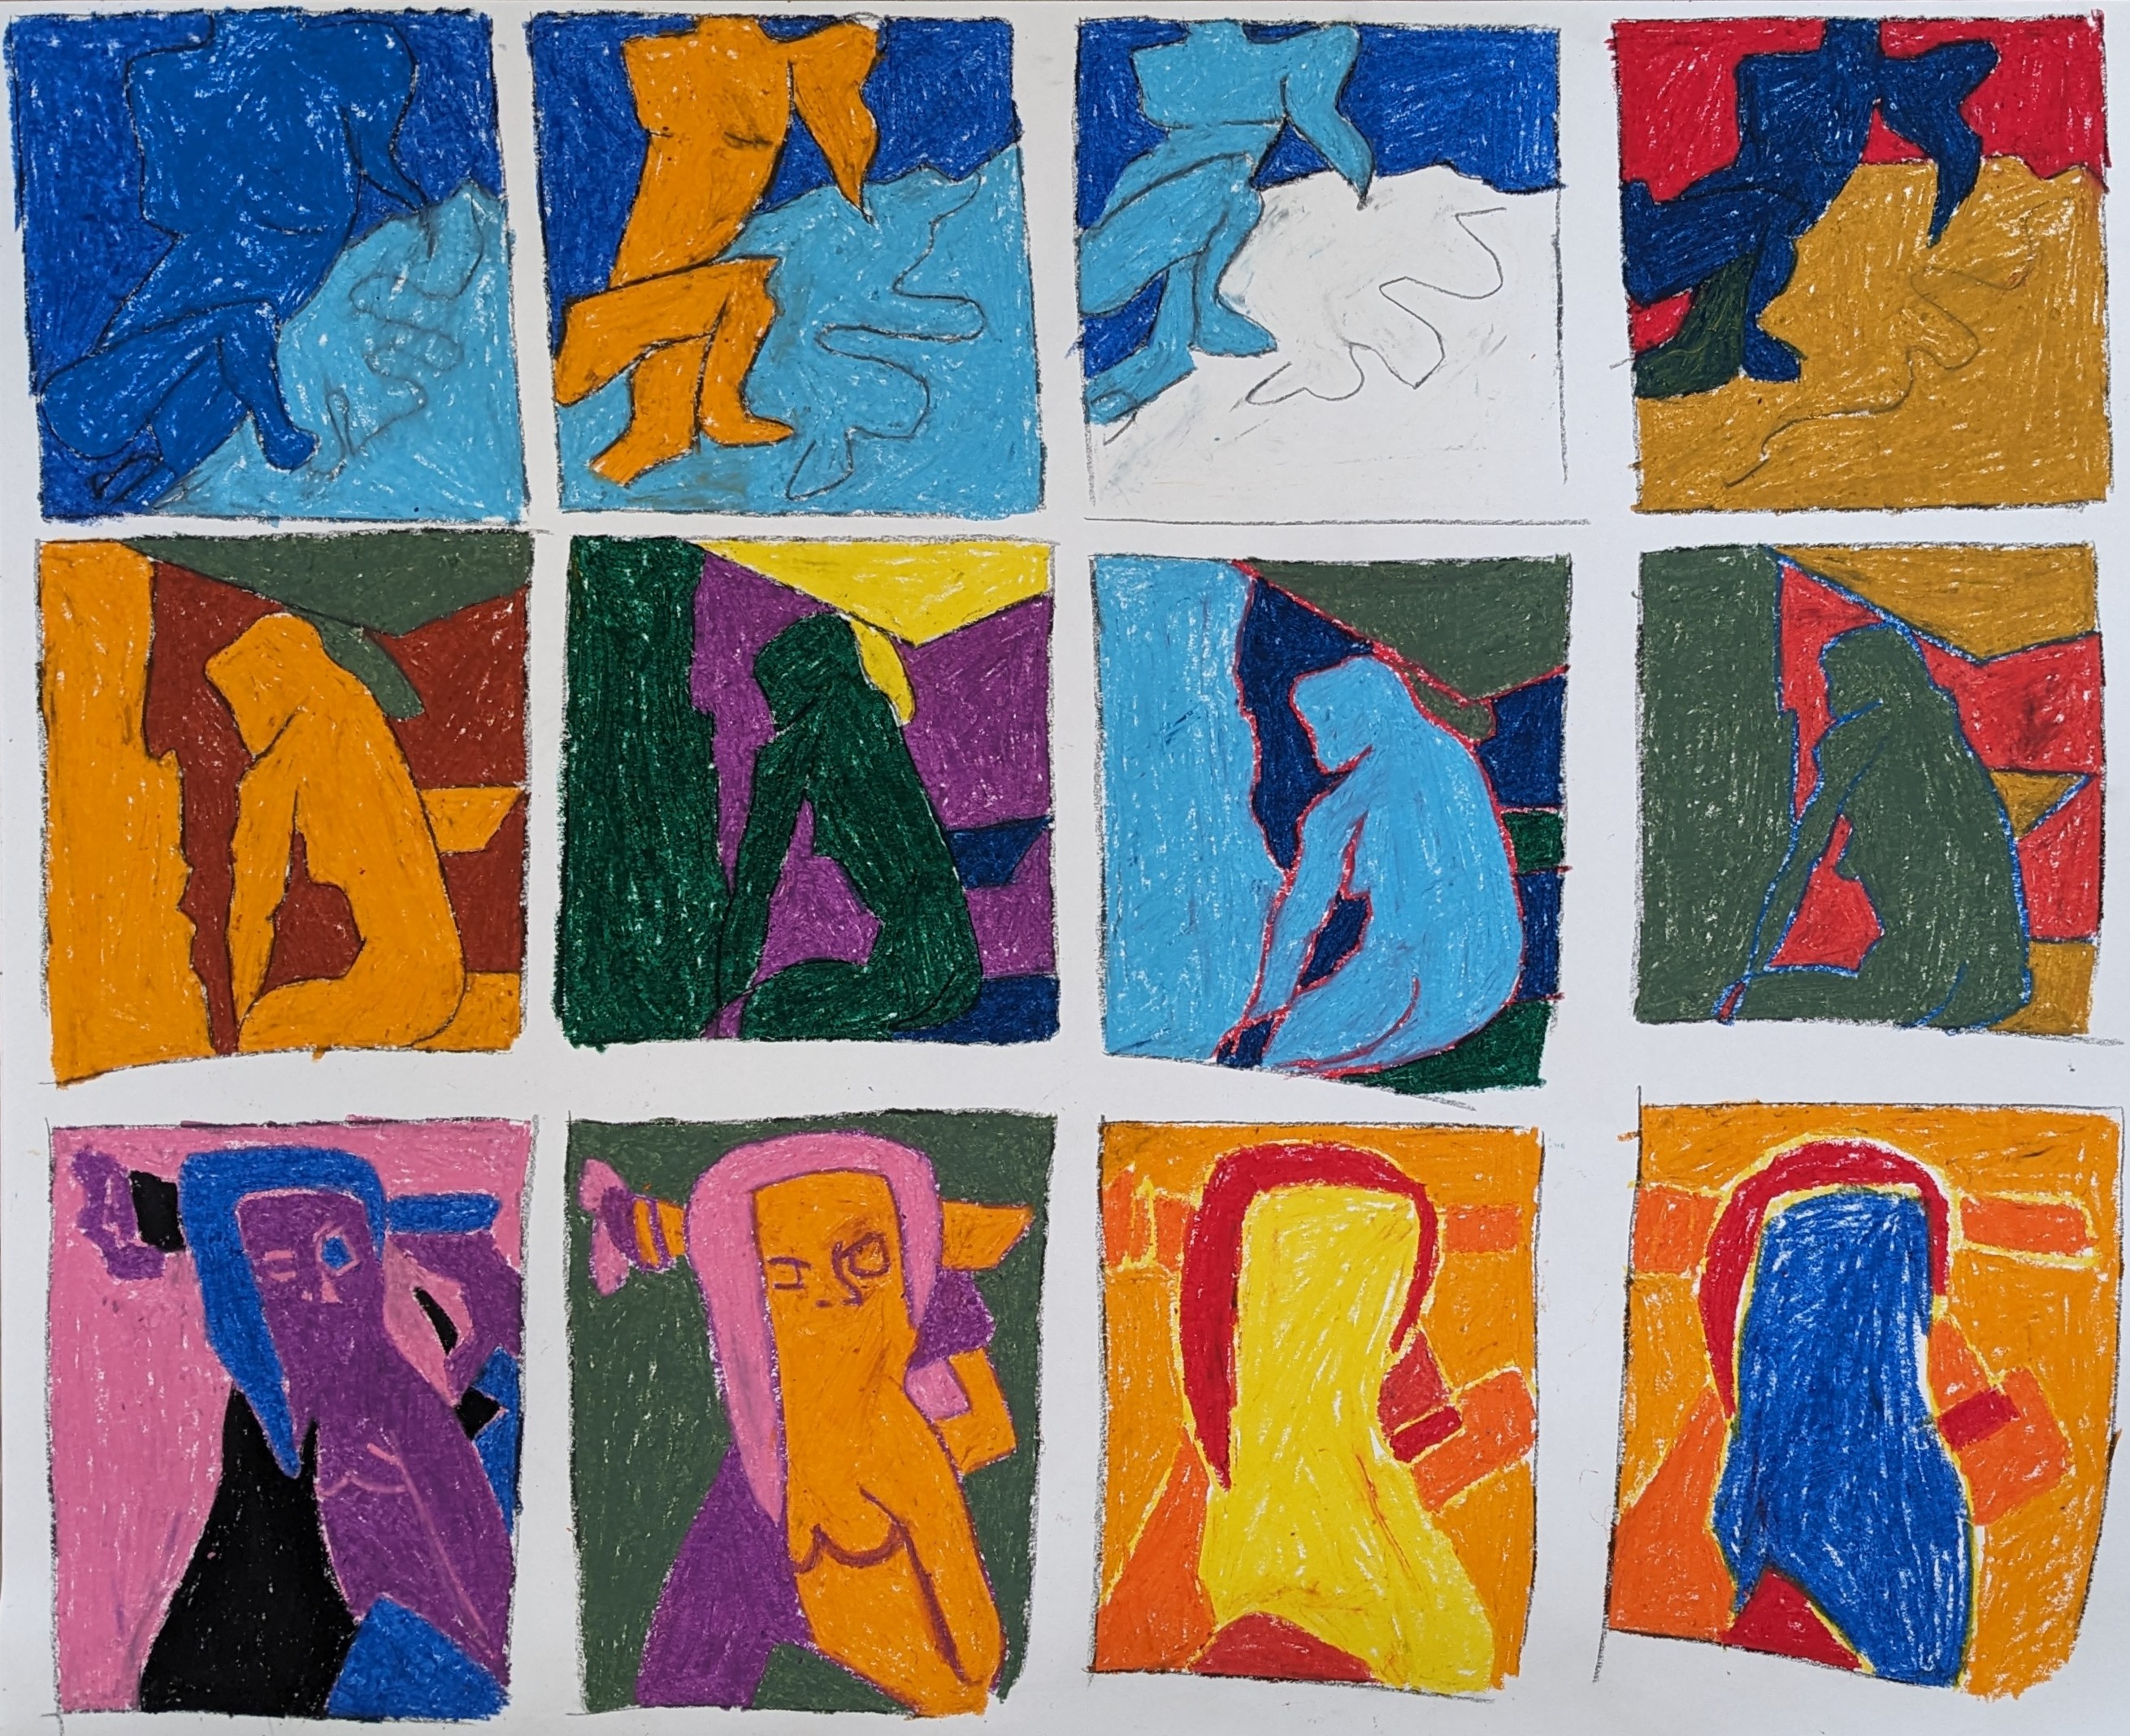 A series of 12 abstract life drawings exploring different colour schemes in oil pastel